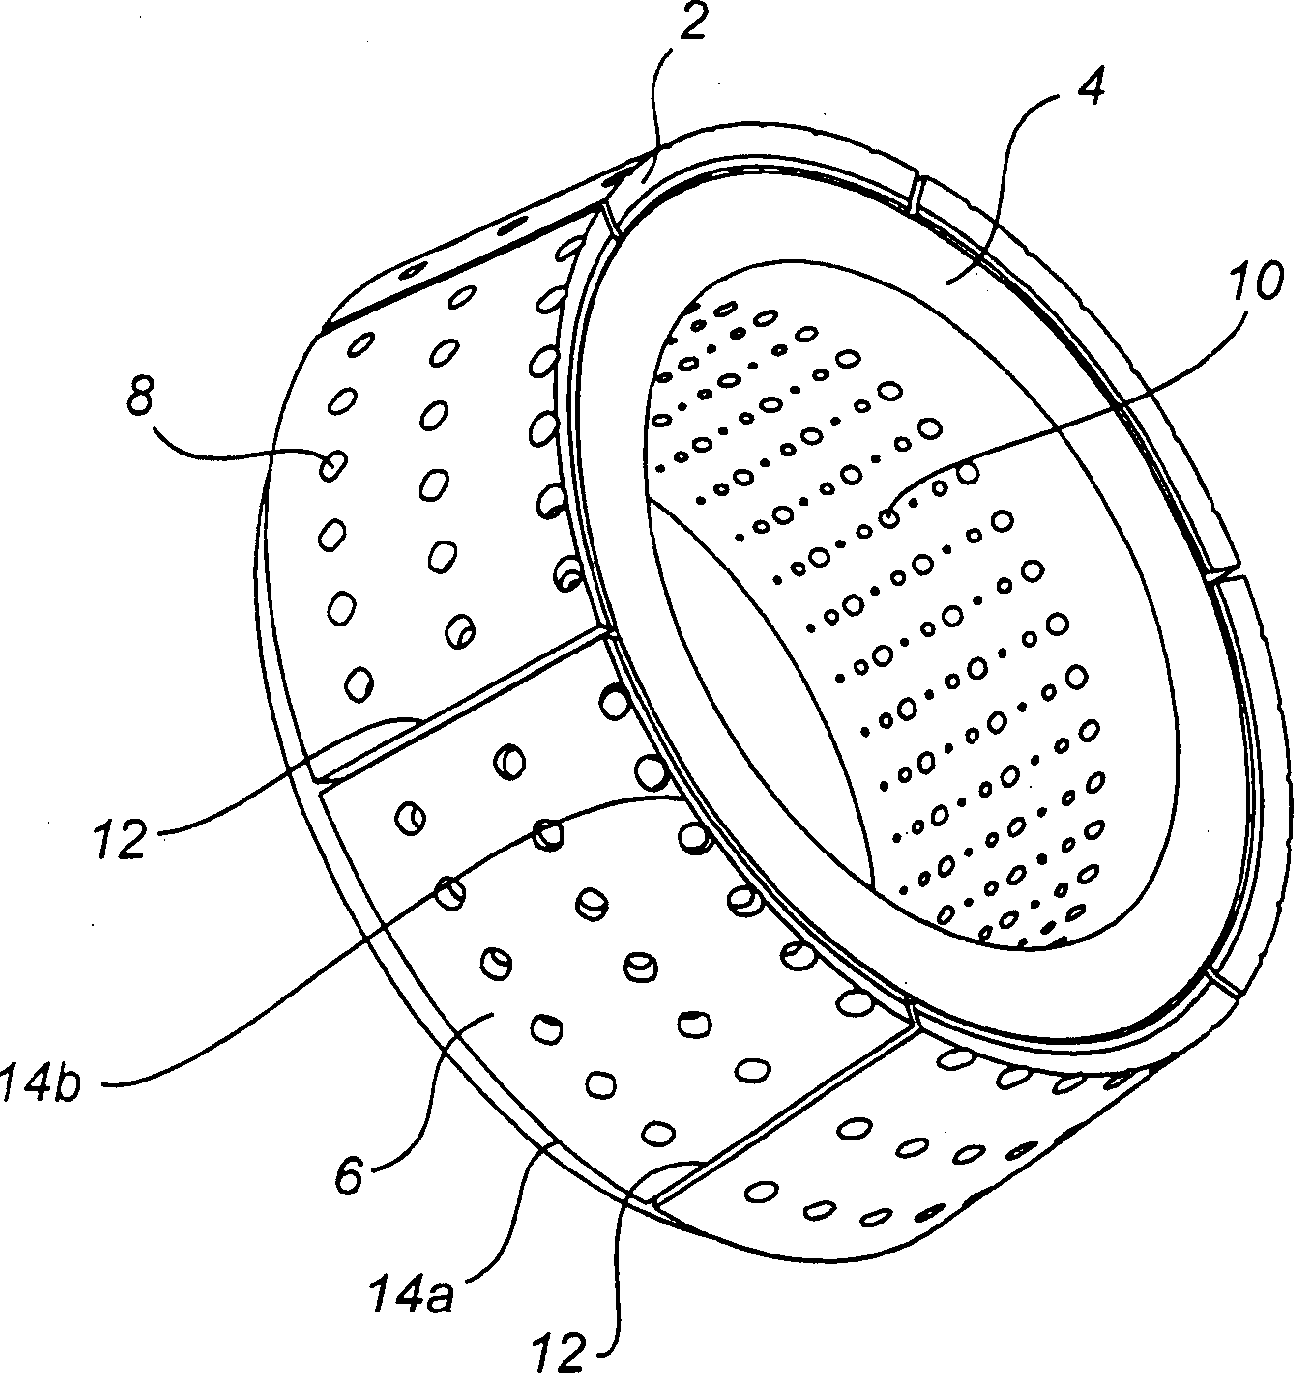 Apparatus and method for focusing a radiotherapy field, where slidable plates on the collimator ring controls the collimator